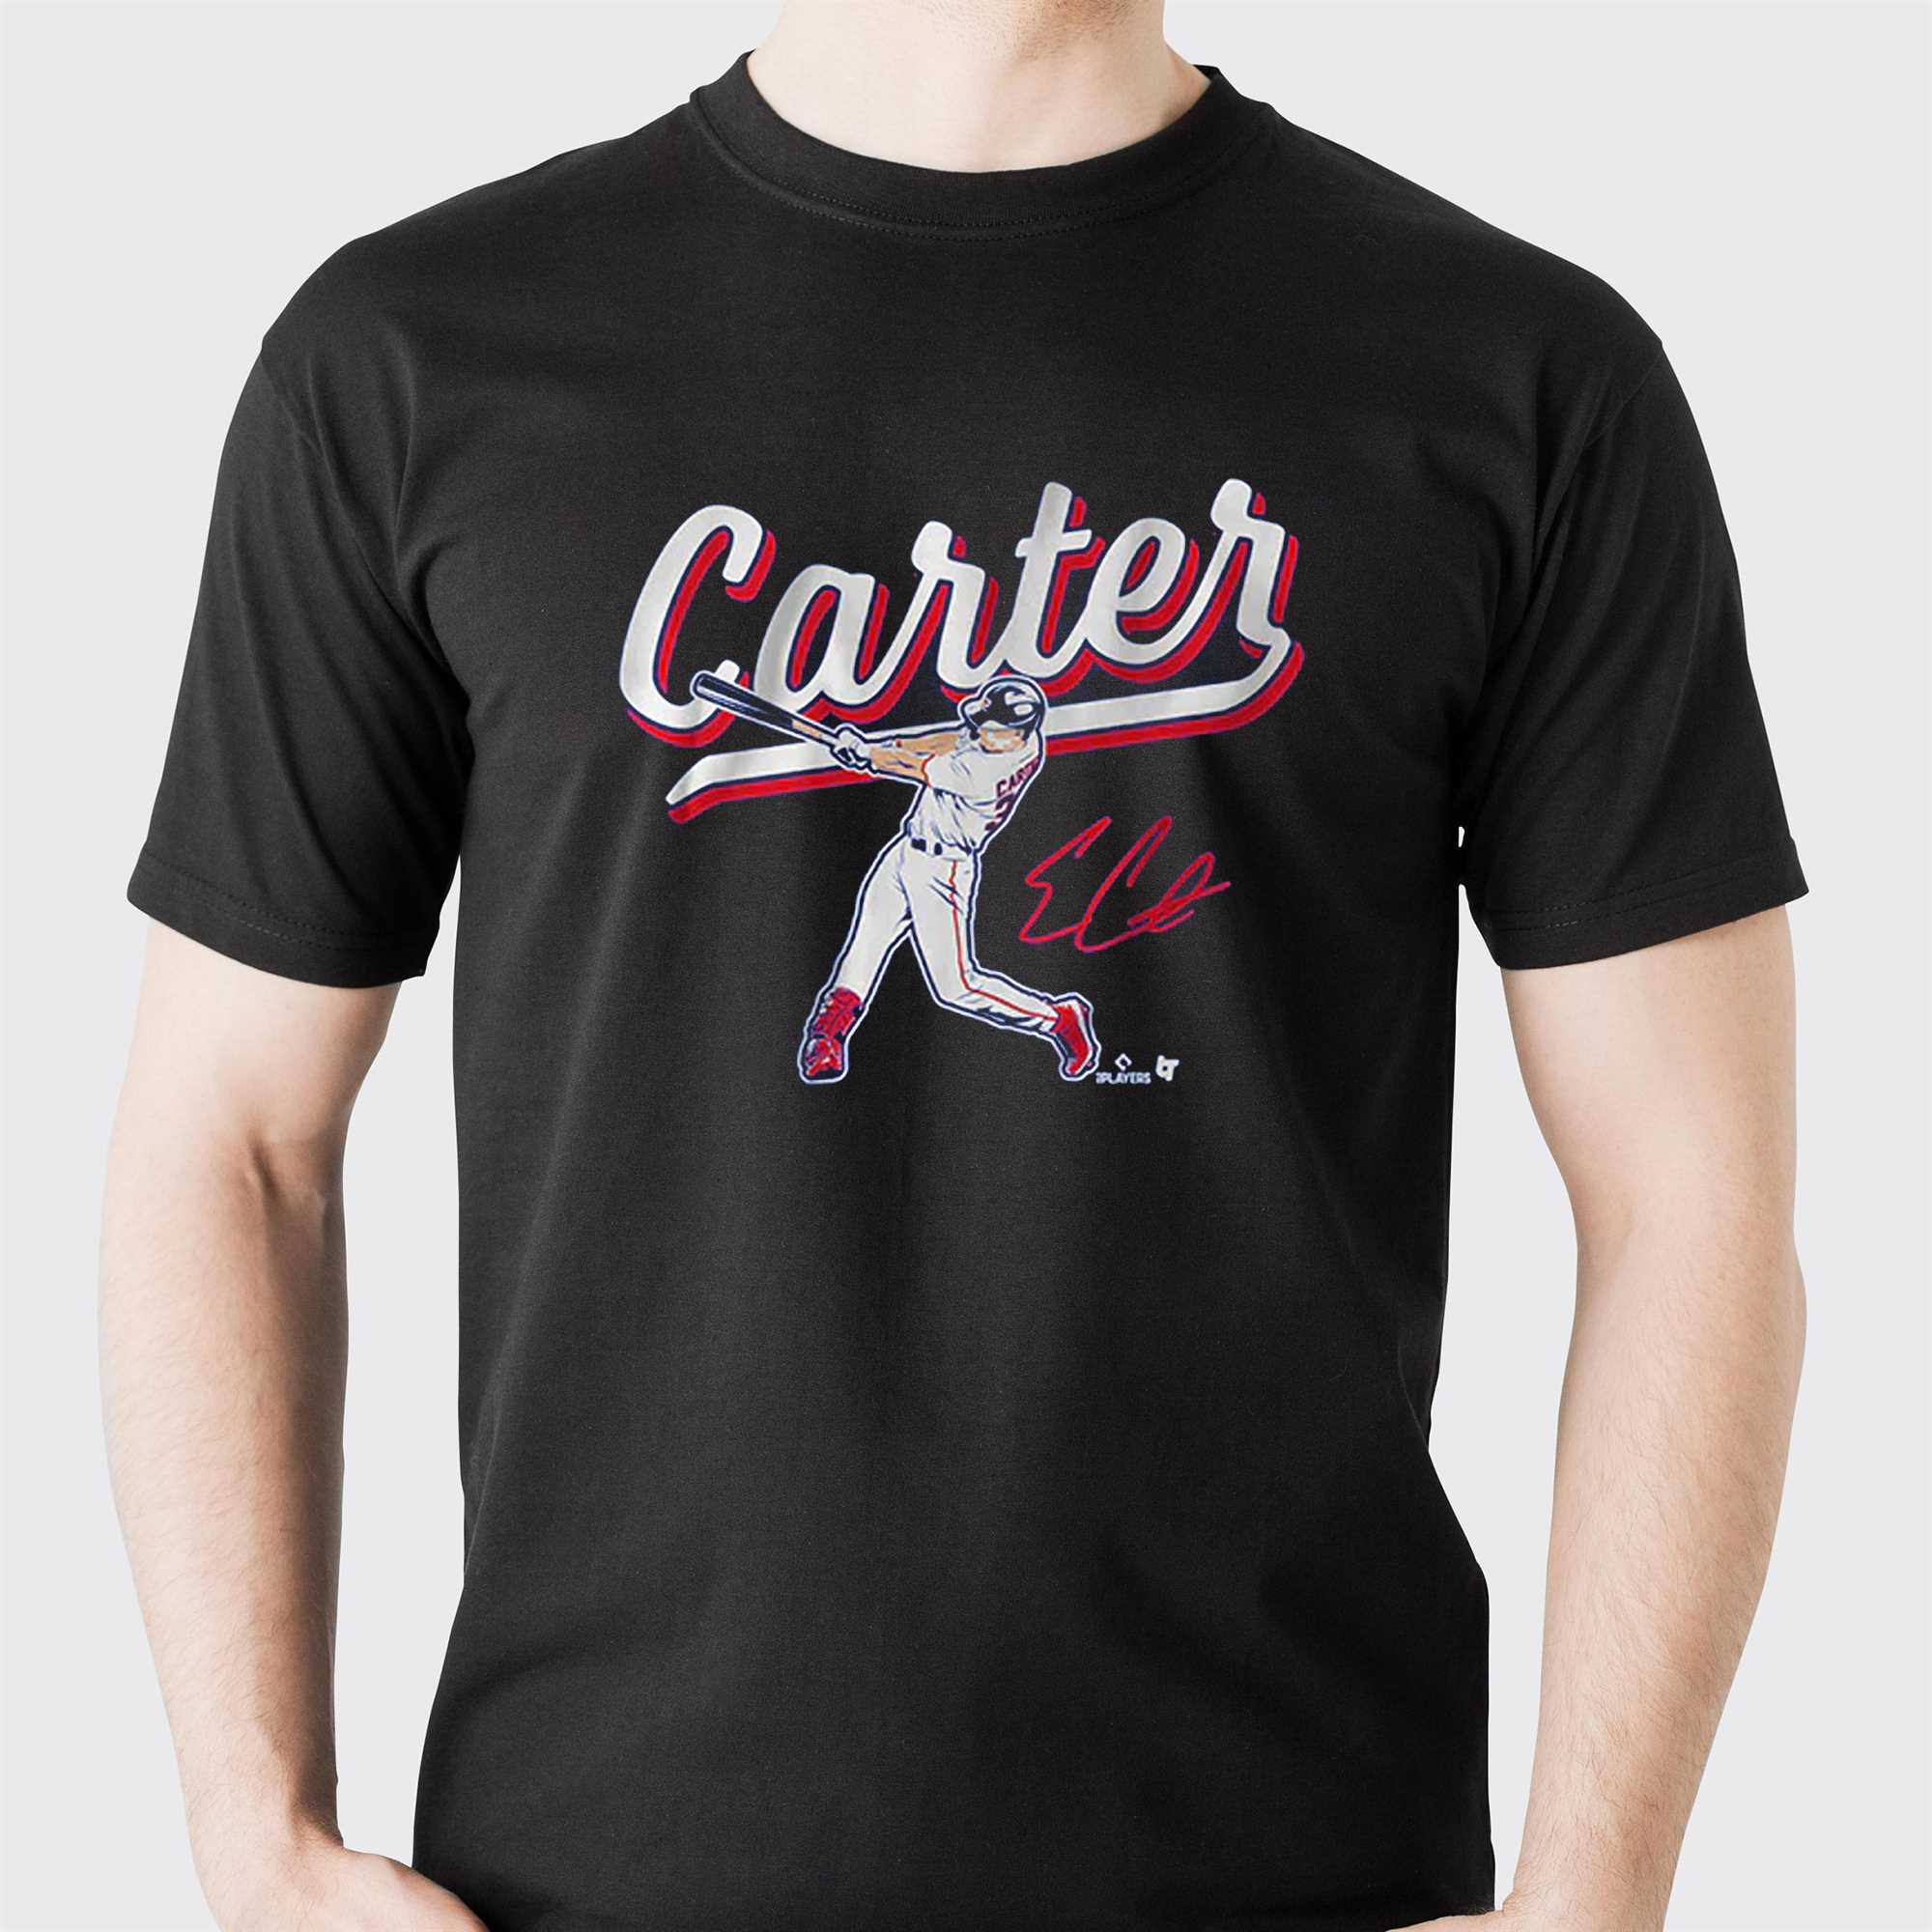 Carlos Correa what time is it Minnesota shirt - Limotees